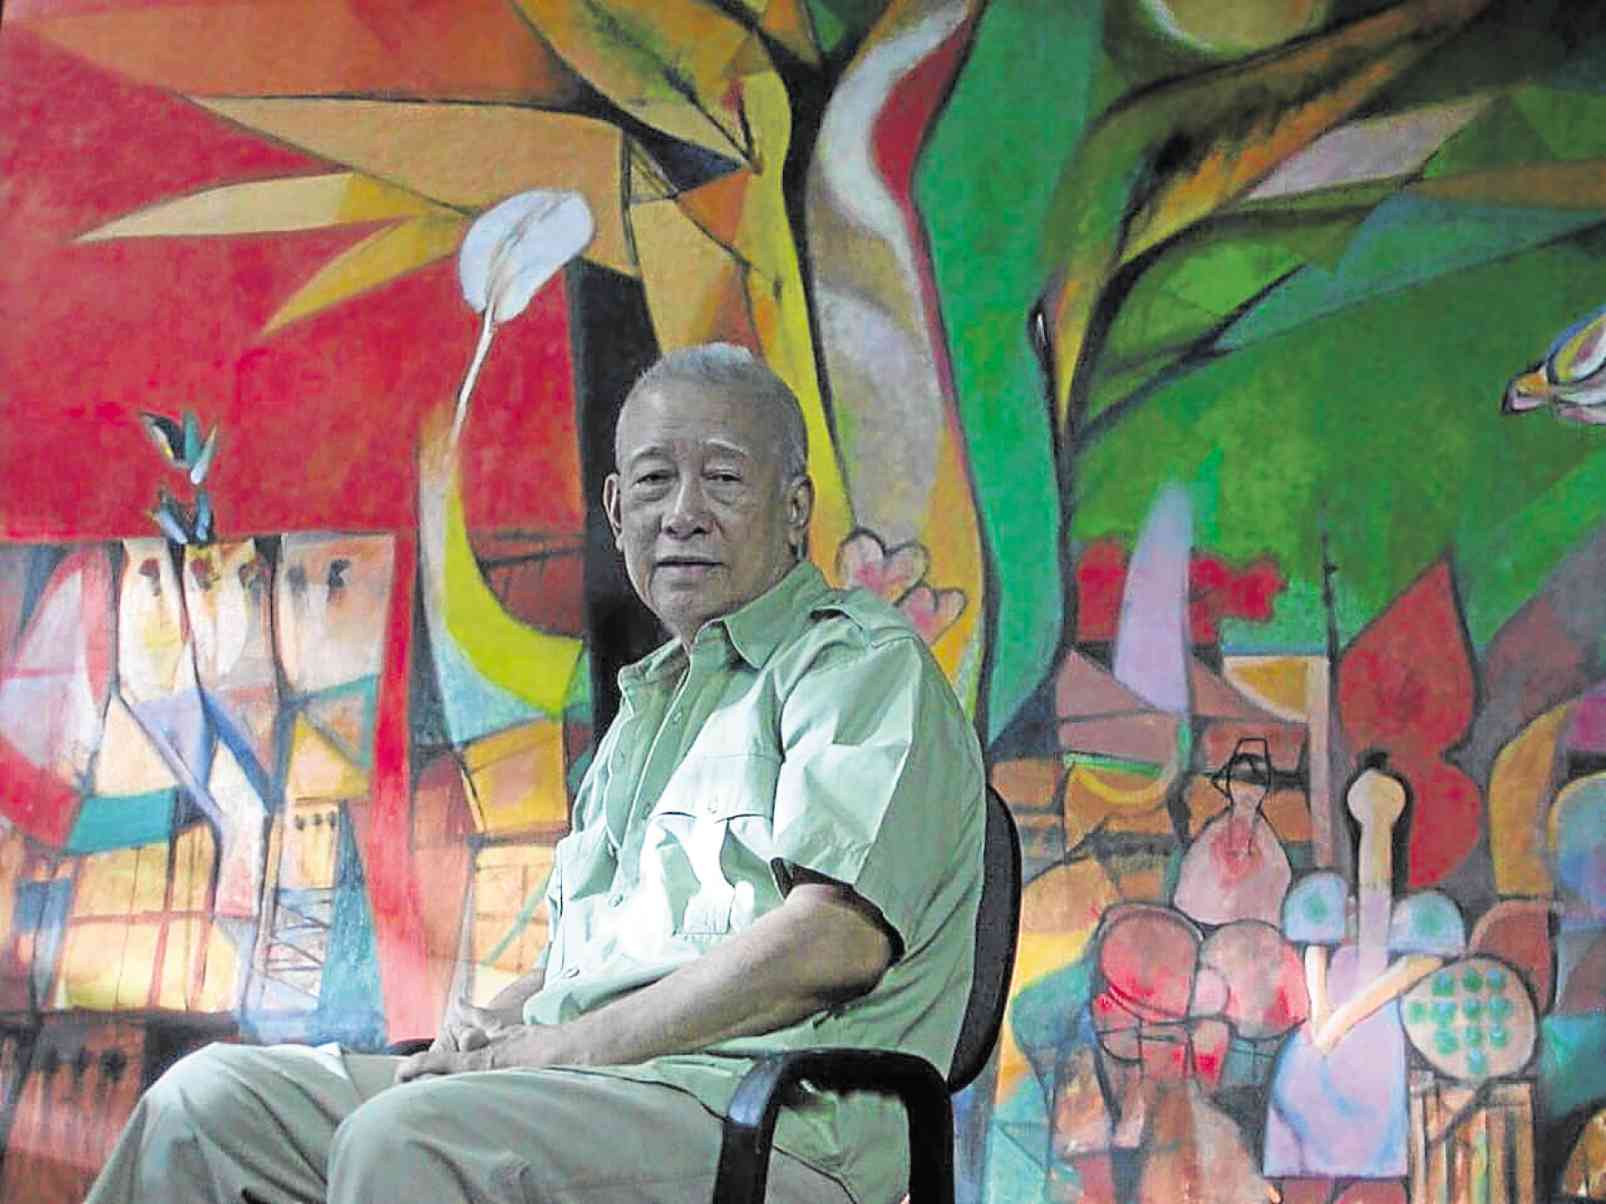 Malang: Painter charmed with imaginative use of color | Inquirer Lifestyle